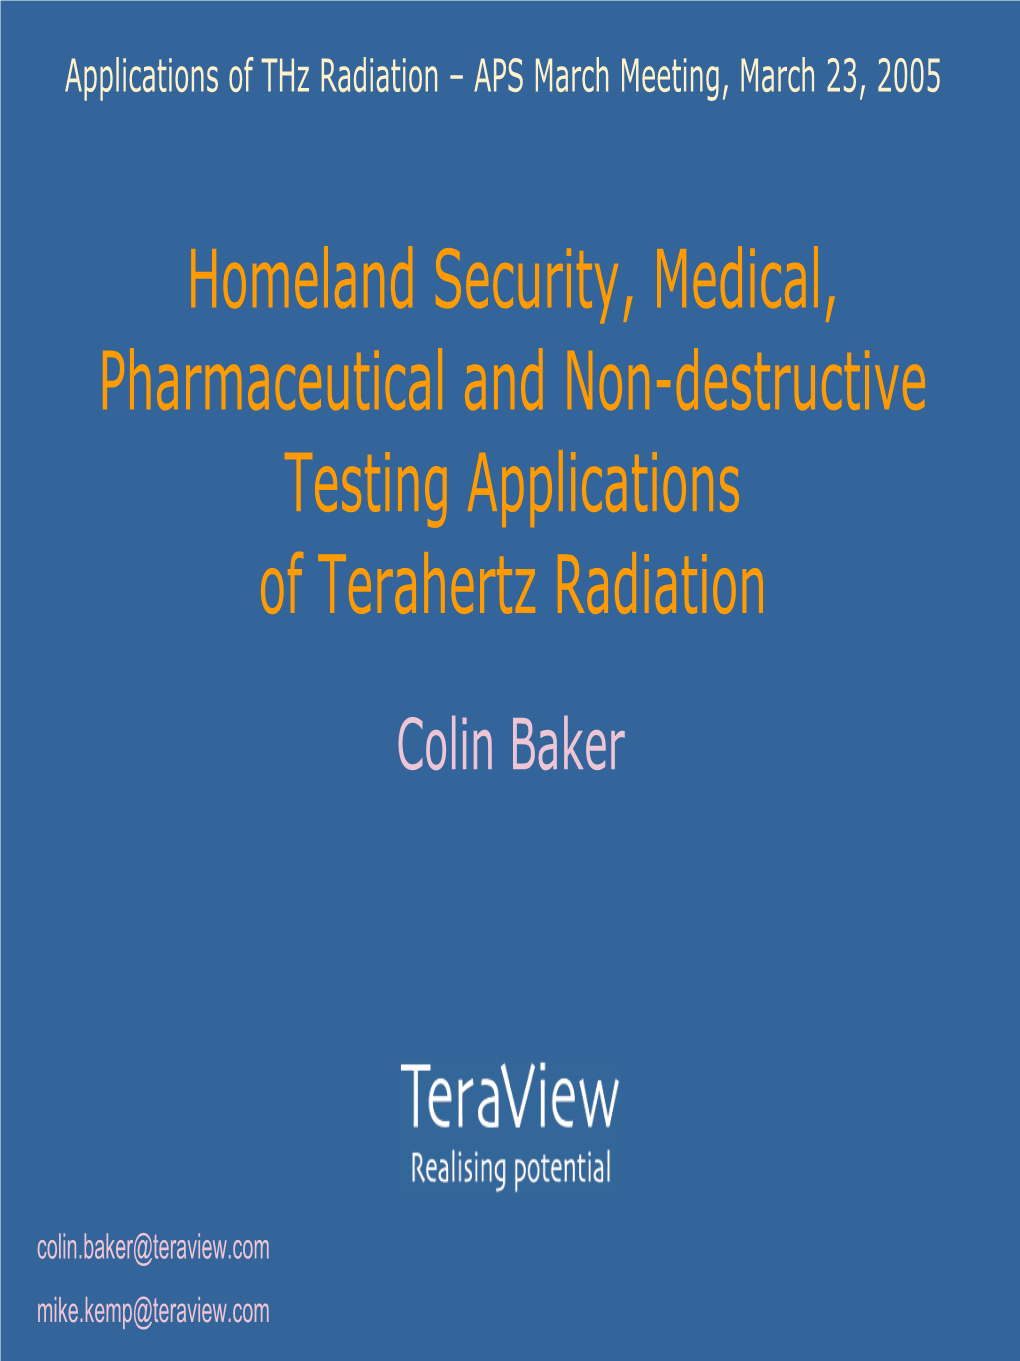 Homeland Security, Medical, Pharmaceutical and Non-Destructive Testing Applications of Terahertz Radiation